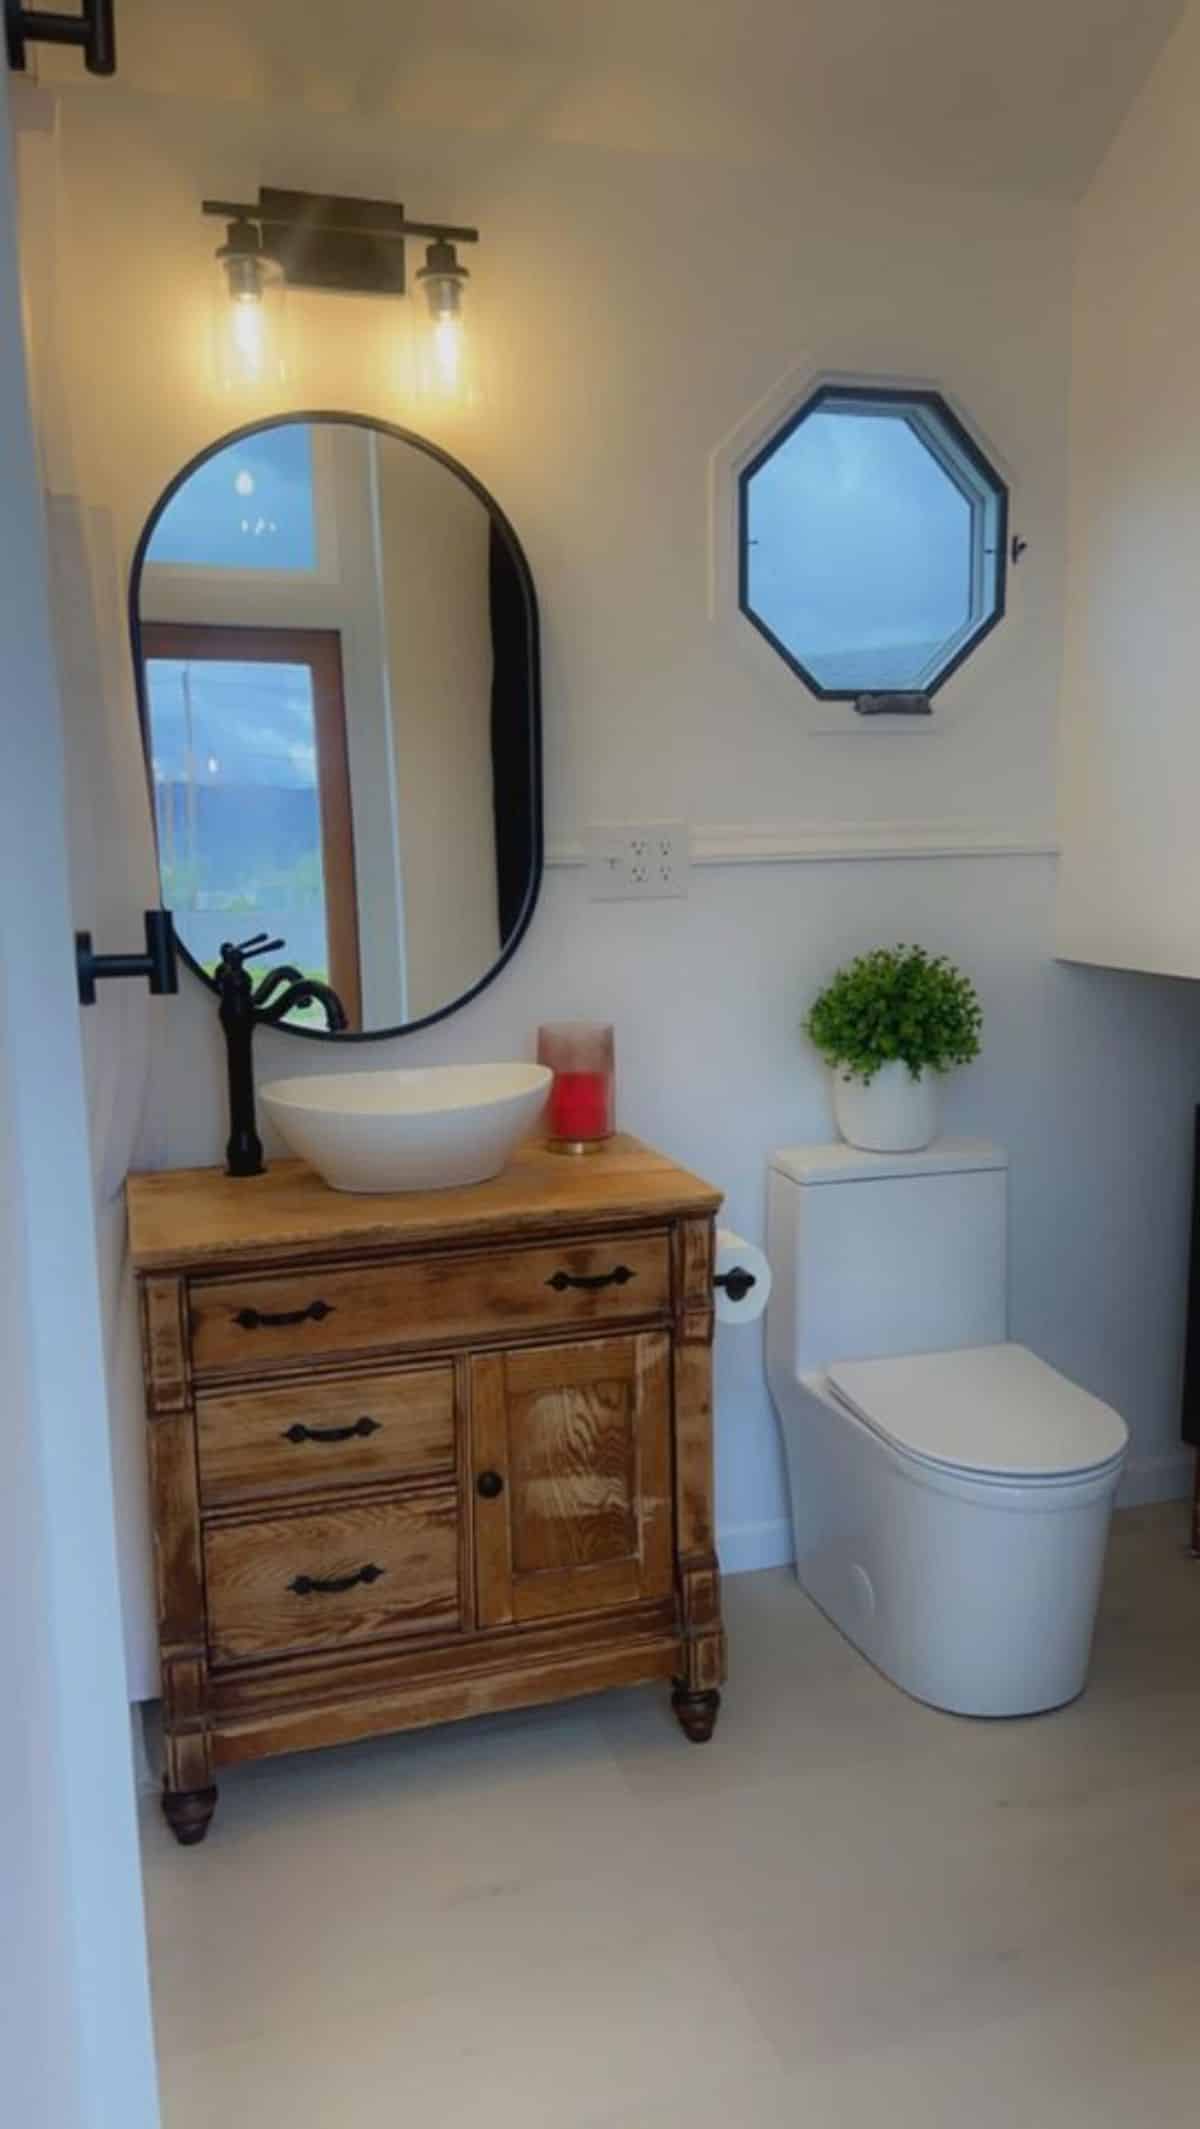 bathroom of spacious tiny home has all the standard fittings with huge mirror